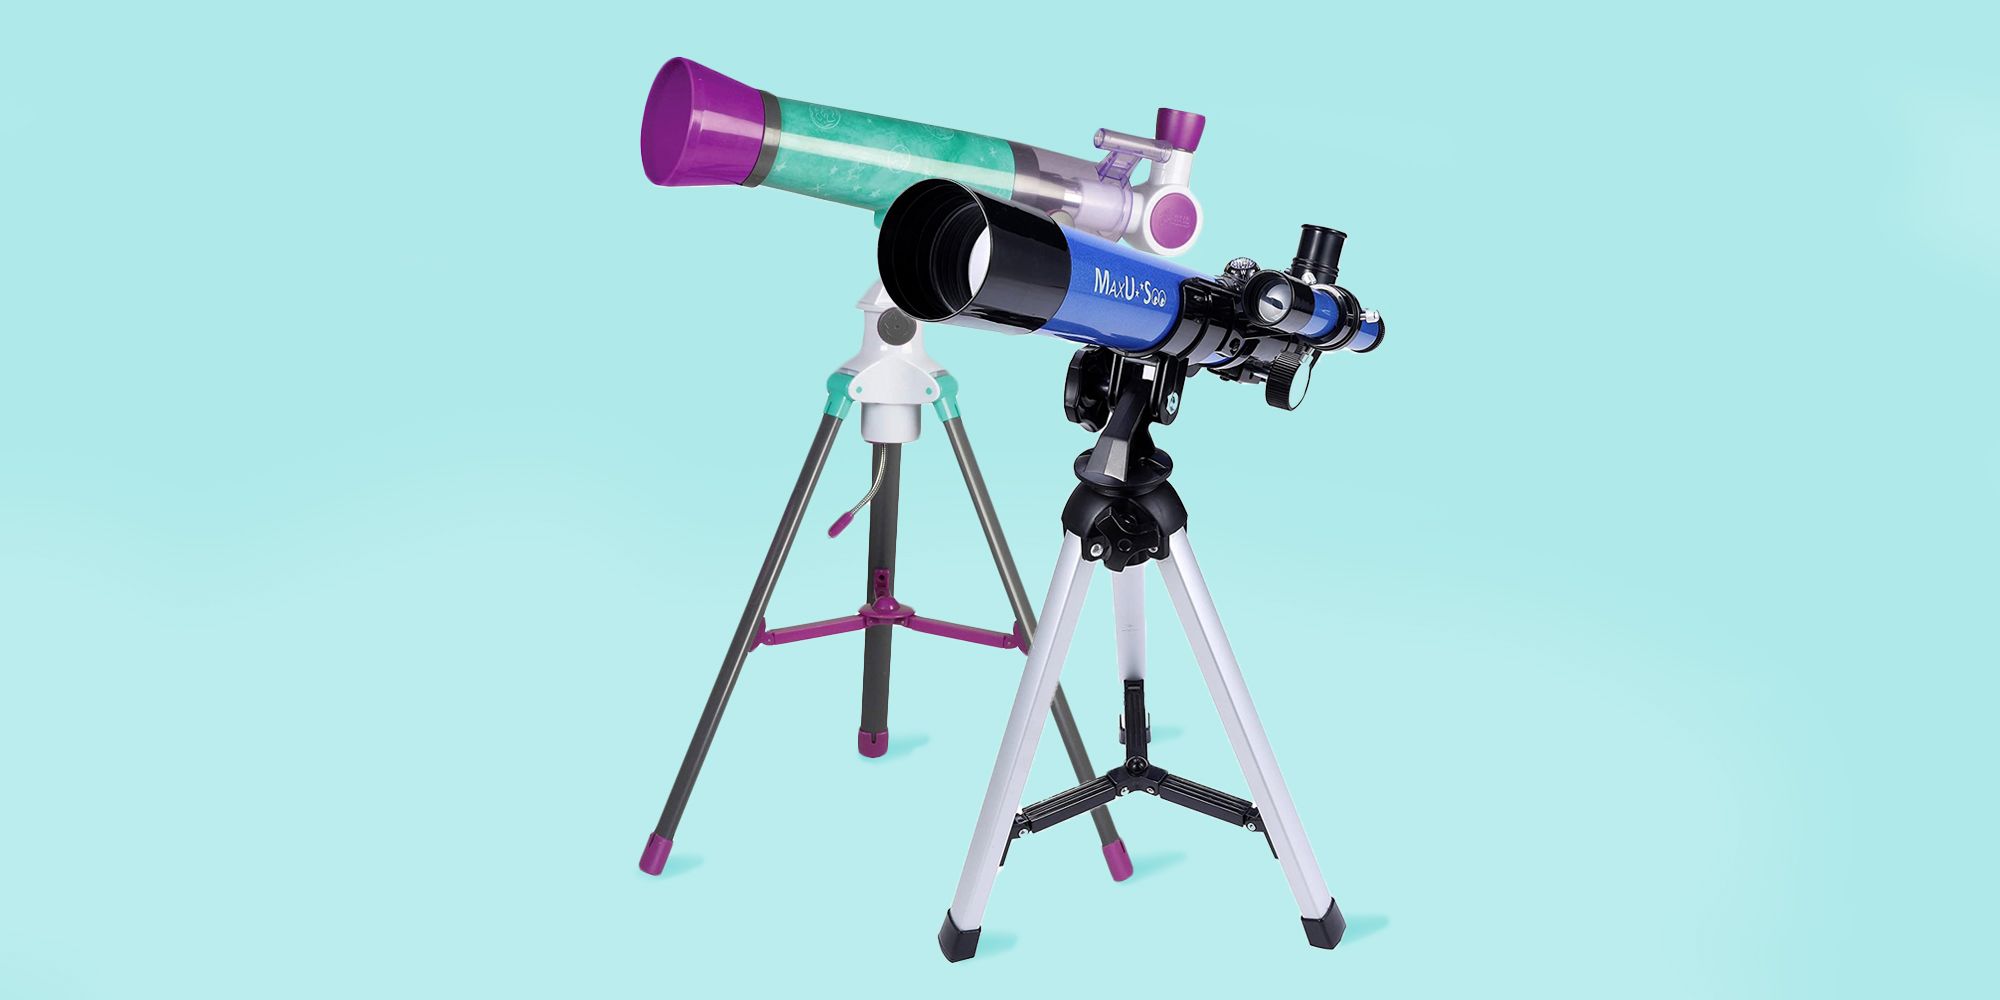 KKTECT Telescope for Kids Beginners,70mm Portable Astronomical Telescope with Tripod,Mobile Phone Holder and Backpack,The Best Gift for Children to Inspire Their Curiosity and Thirst for Knowledge 